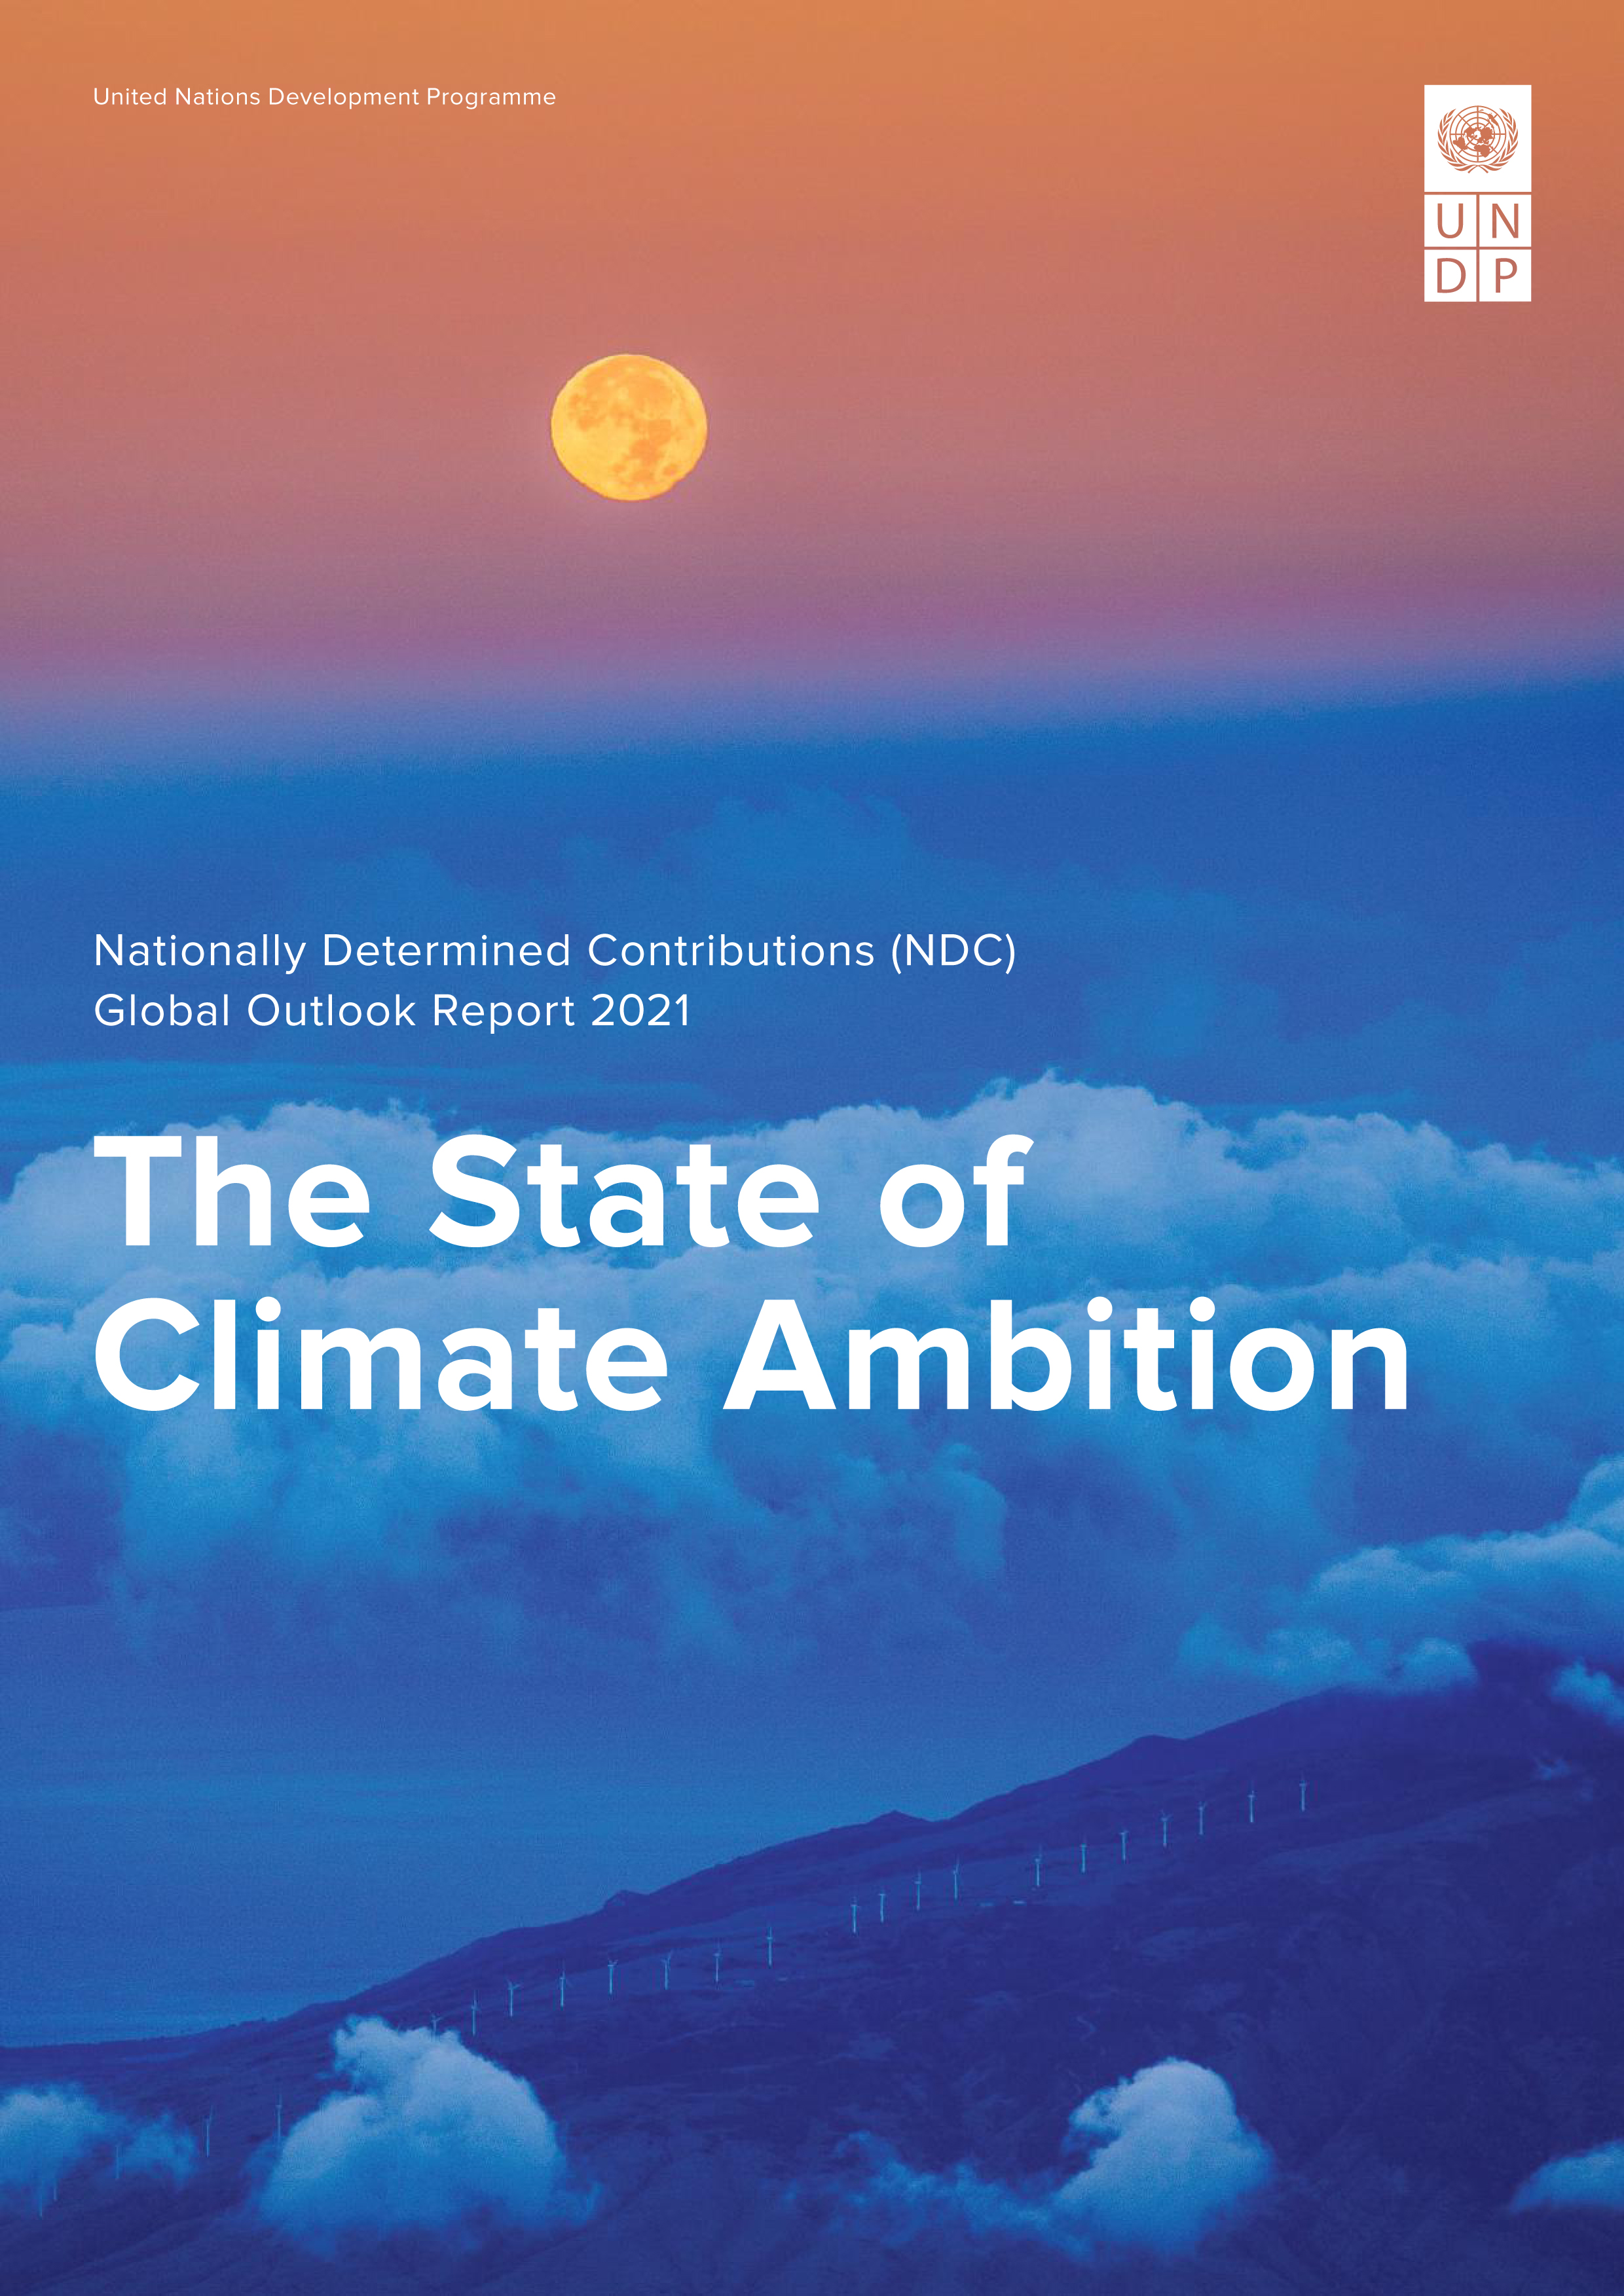 image of Nationally Determined Contributions (NDC) Global Outlook Report 2021